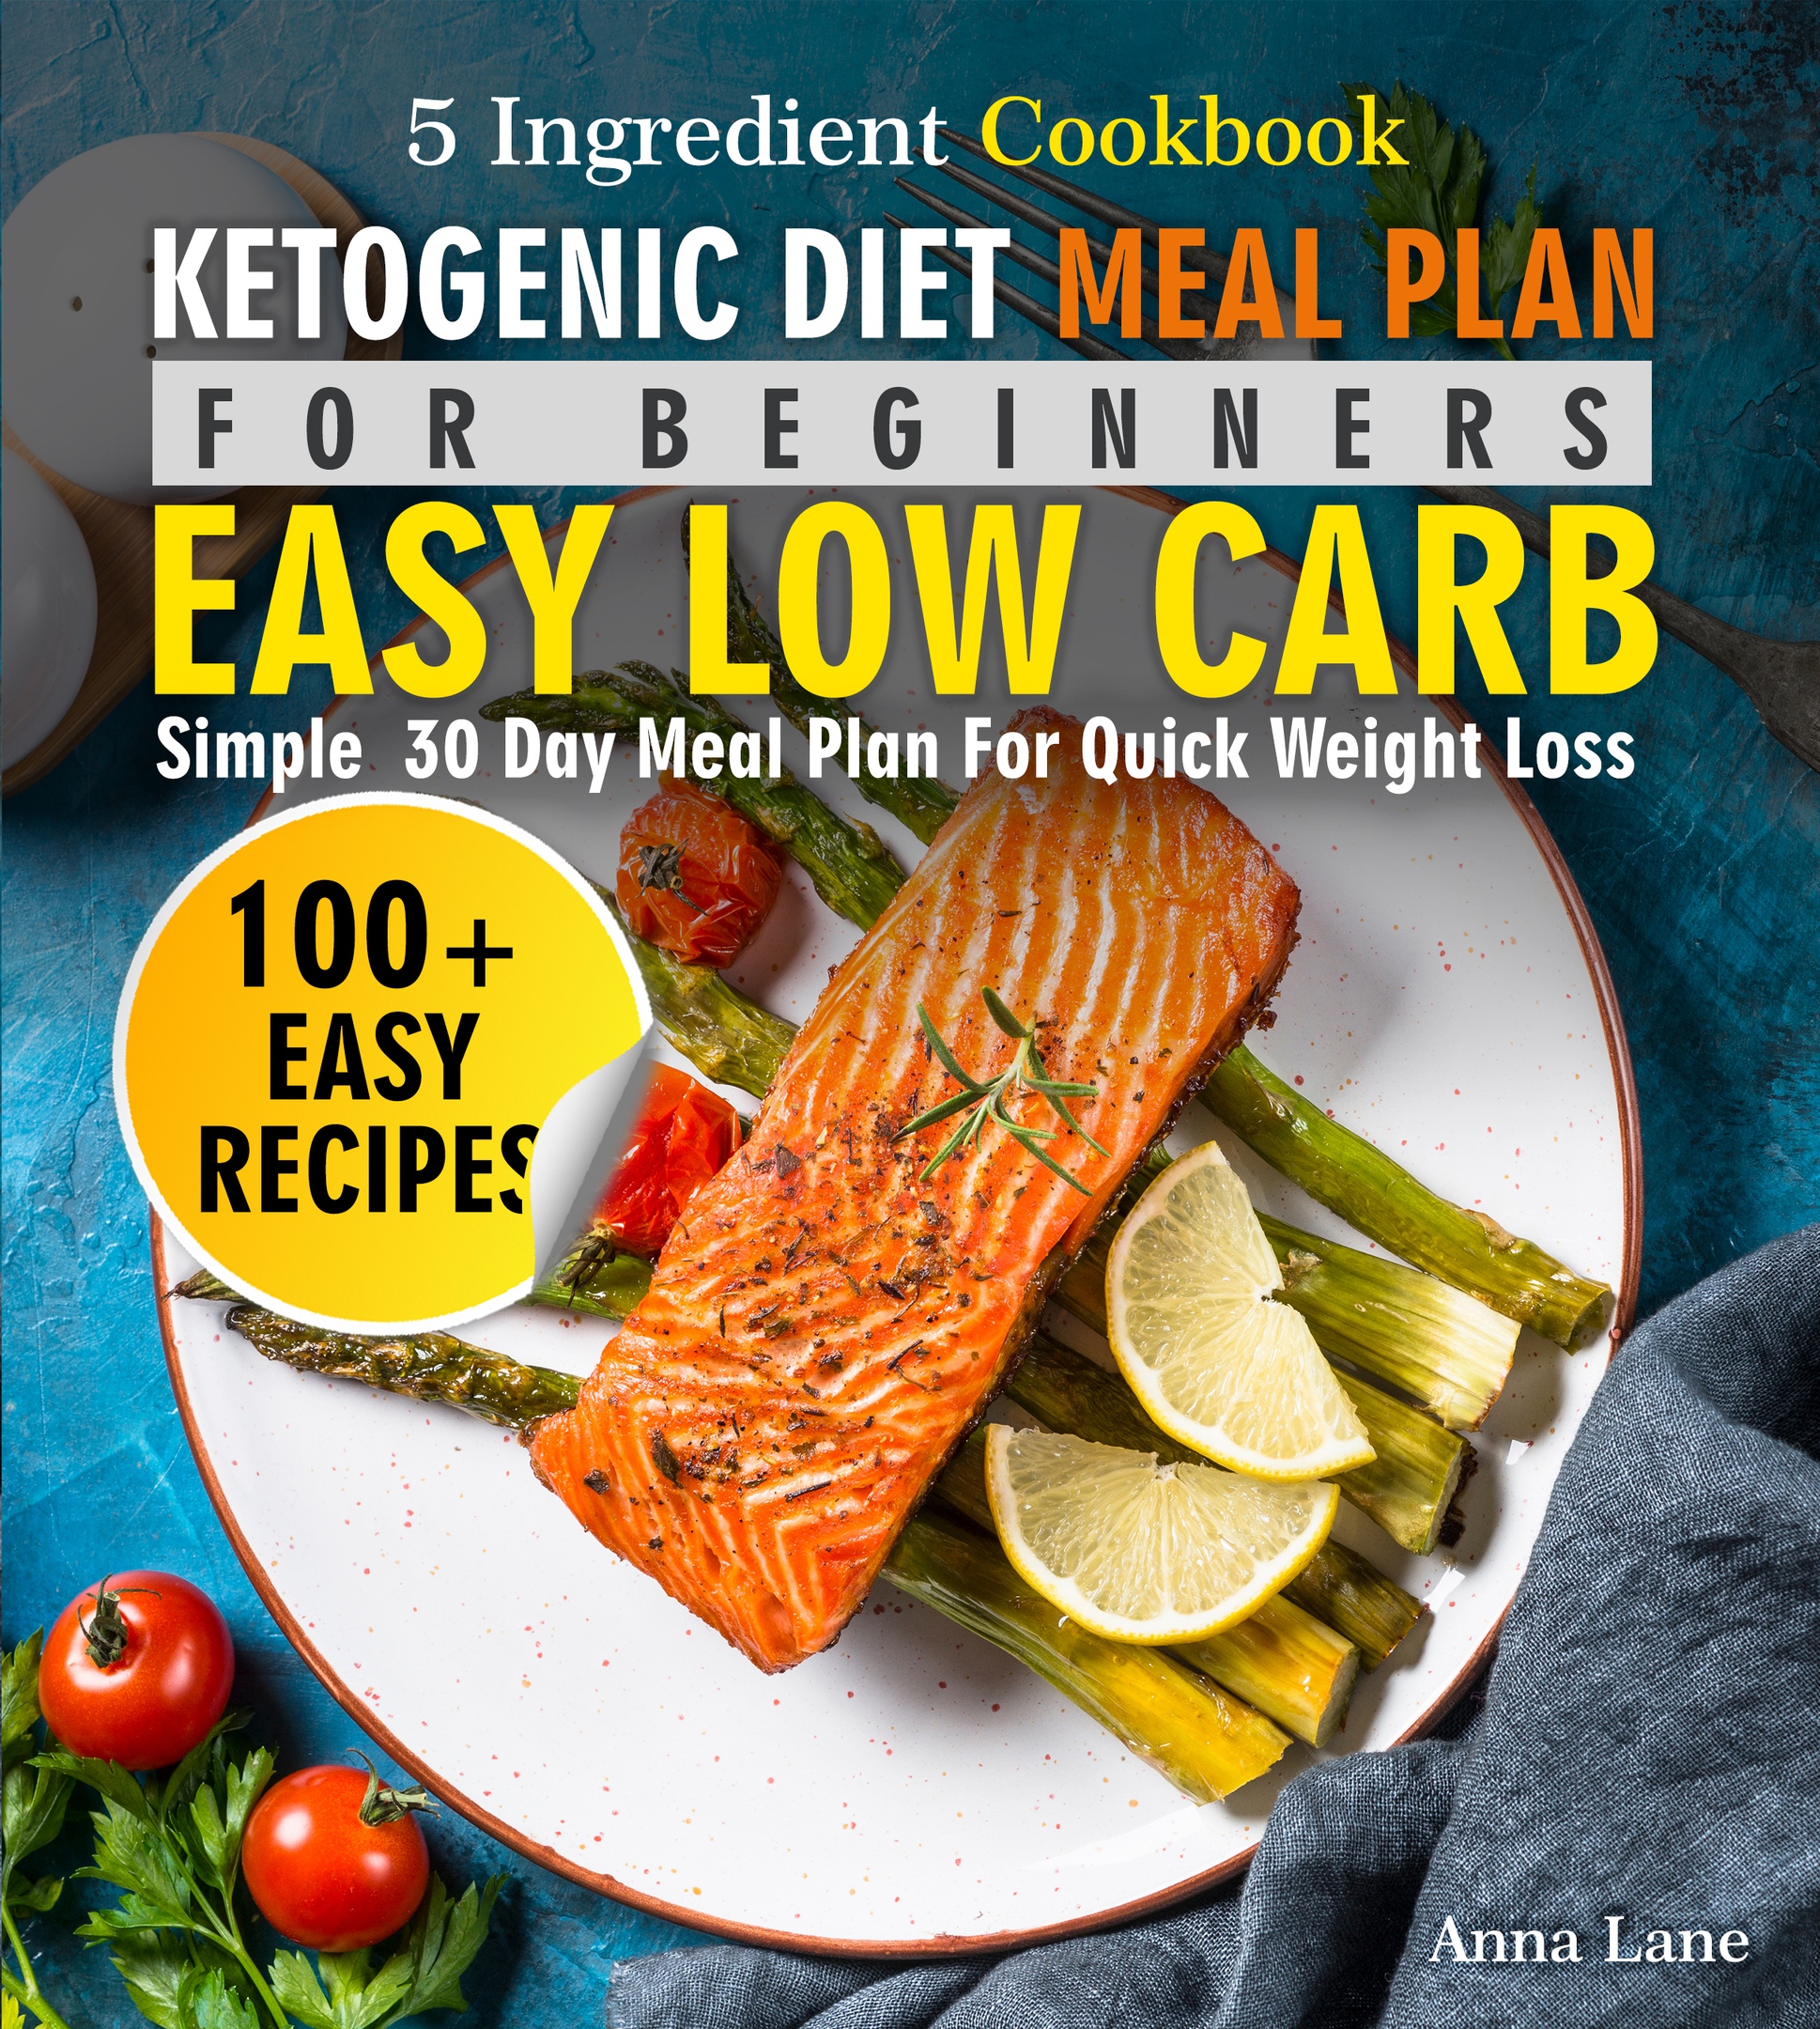 FREE: Ketogenic Diet Meal Plan for Beginners: An Easy, Low Carb, 5-Ingredient Cookbook by Anna Lane